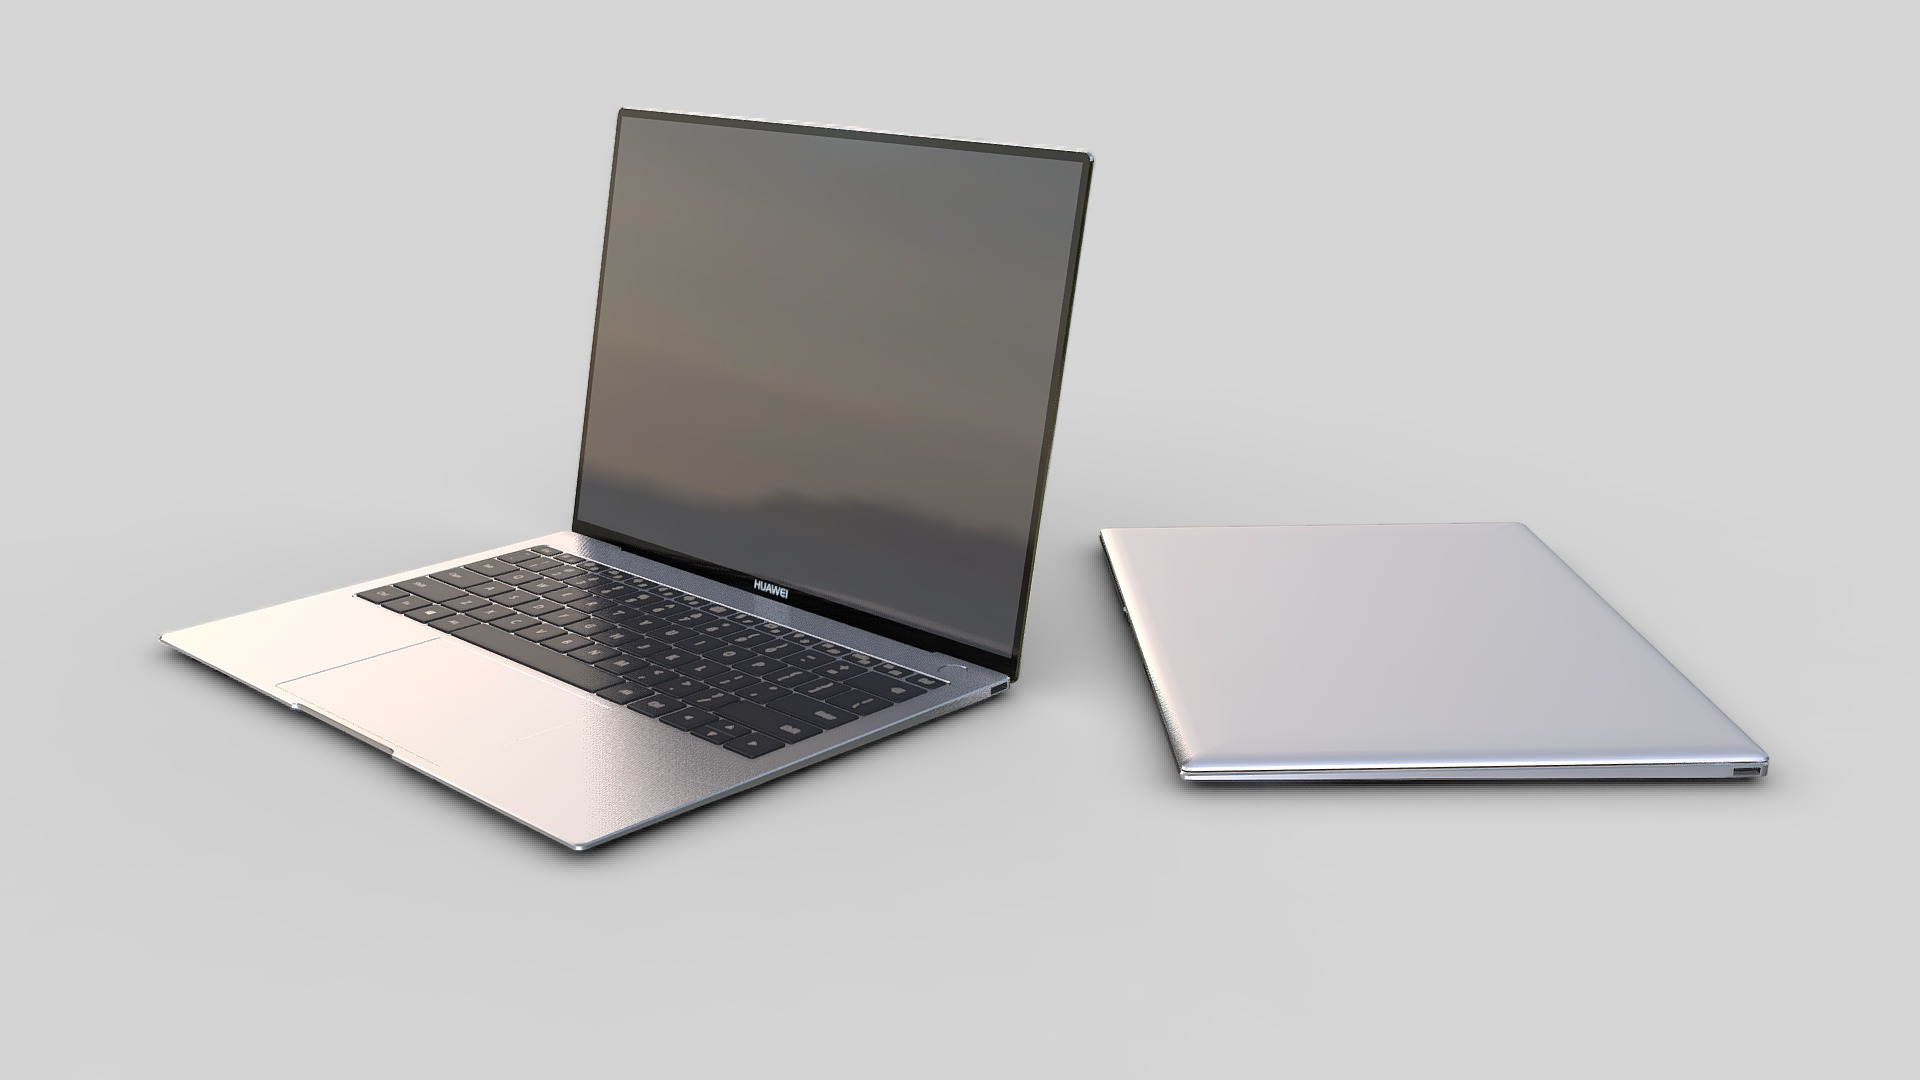 3D model Huawei MateBook X Pro 3D - This is a 3D model of the Huawei MateBook X Pro 3D. The 3D model is about a laptop and a tablet.